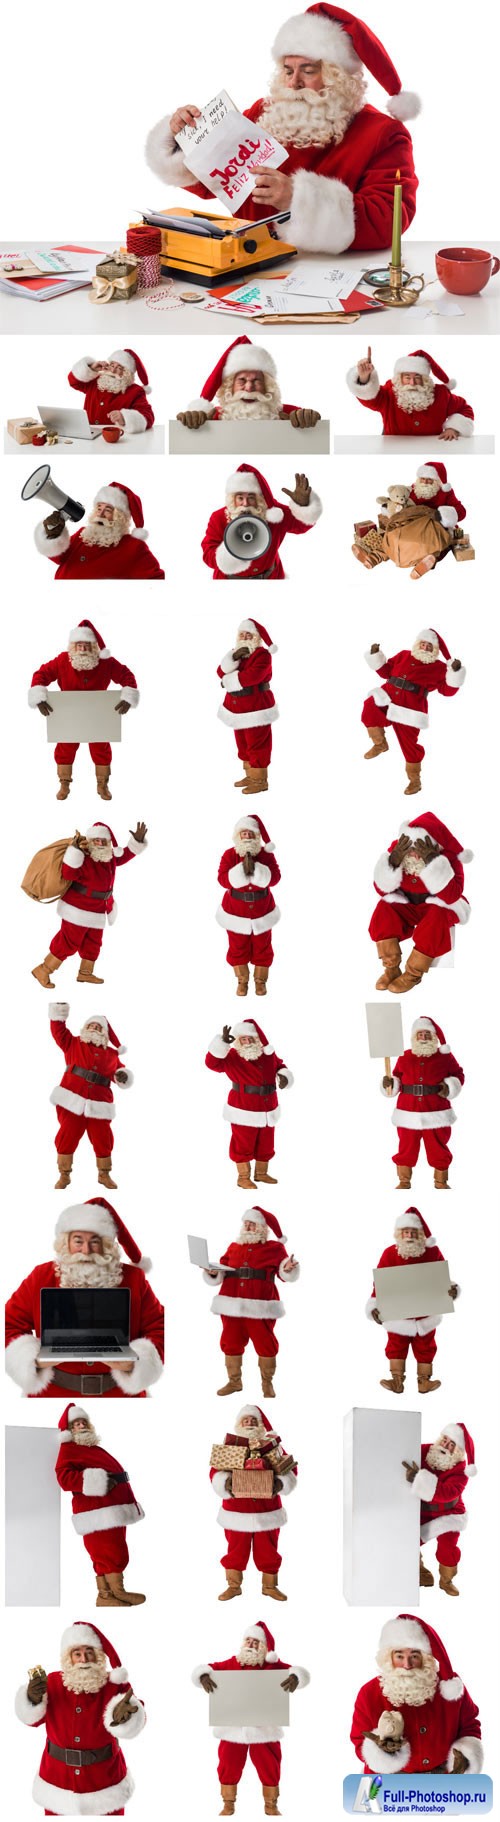 New Year and Christmas stock photos 21